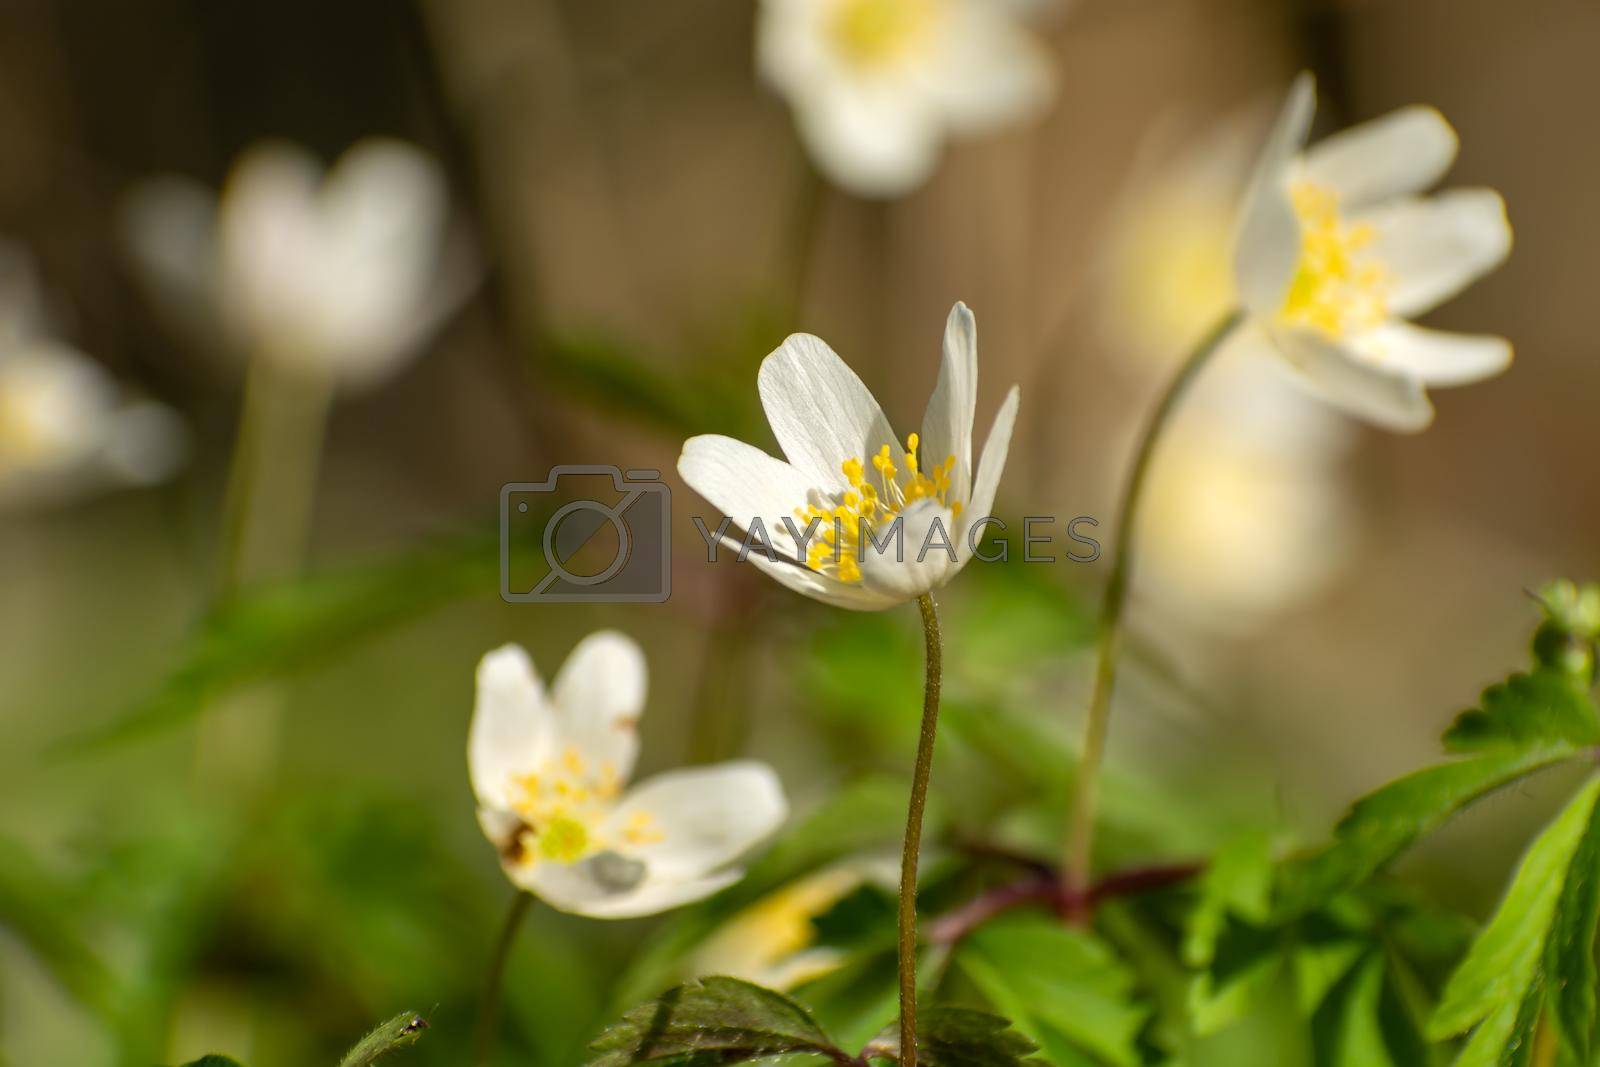 Royalty free image of White Anemone nemorosa flowers in close-up, spring view by darekb22